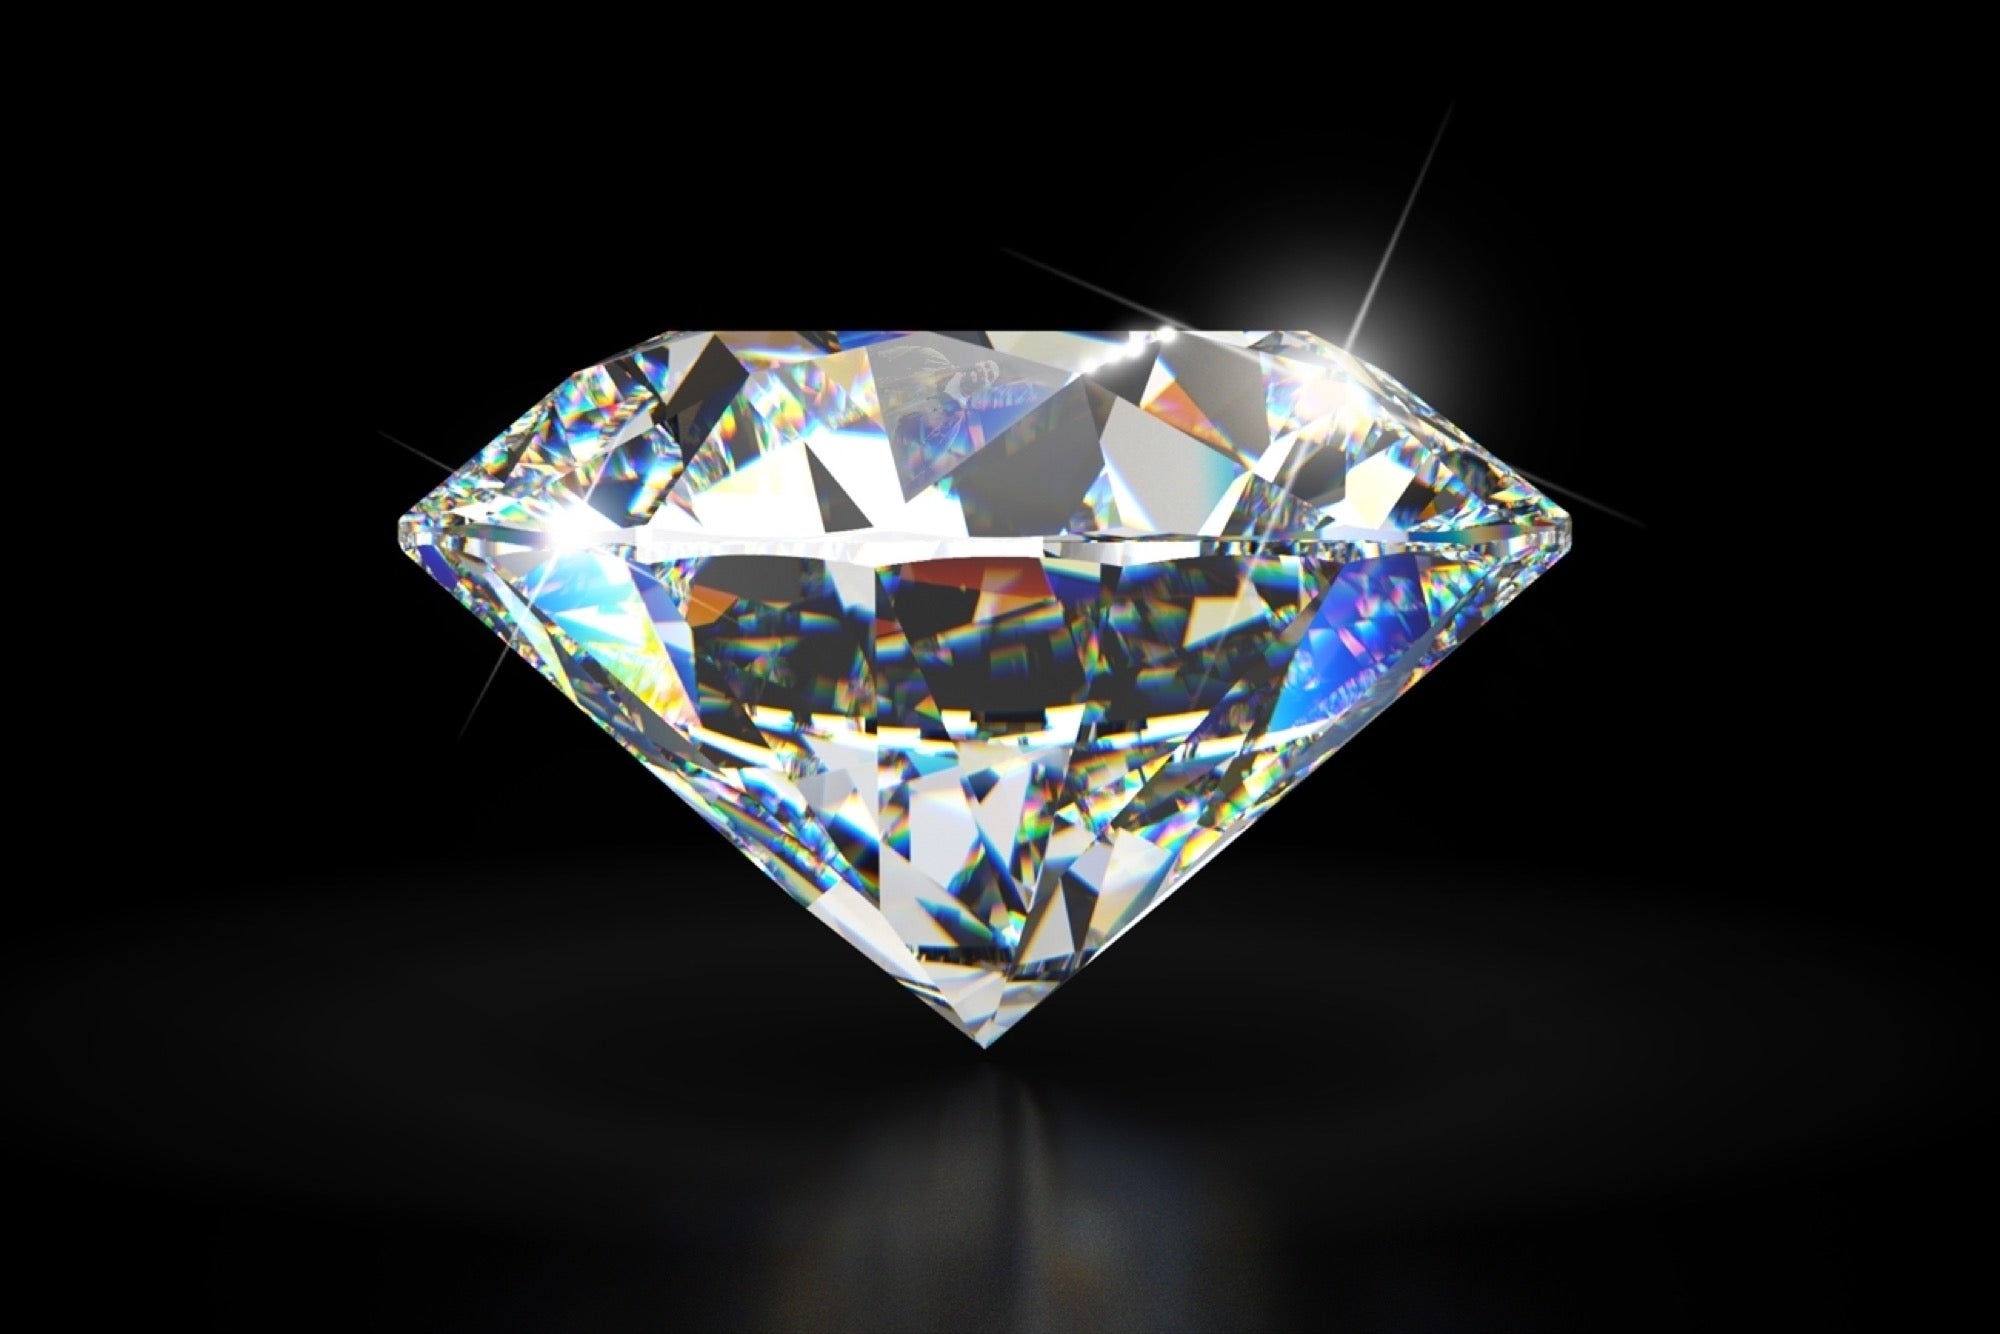 The Value Of Your Diamond The Gold Company